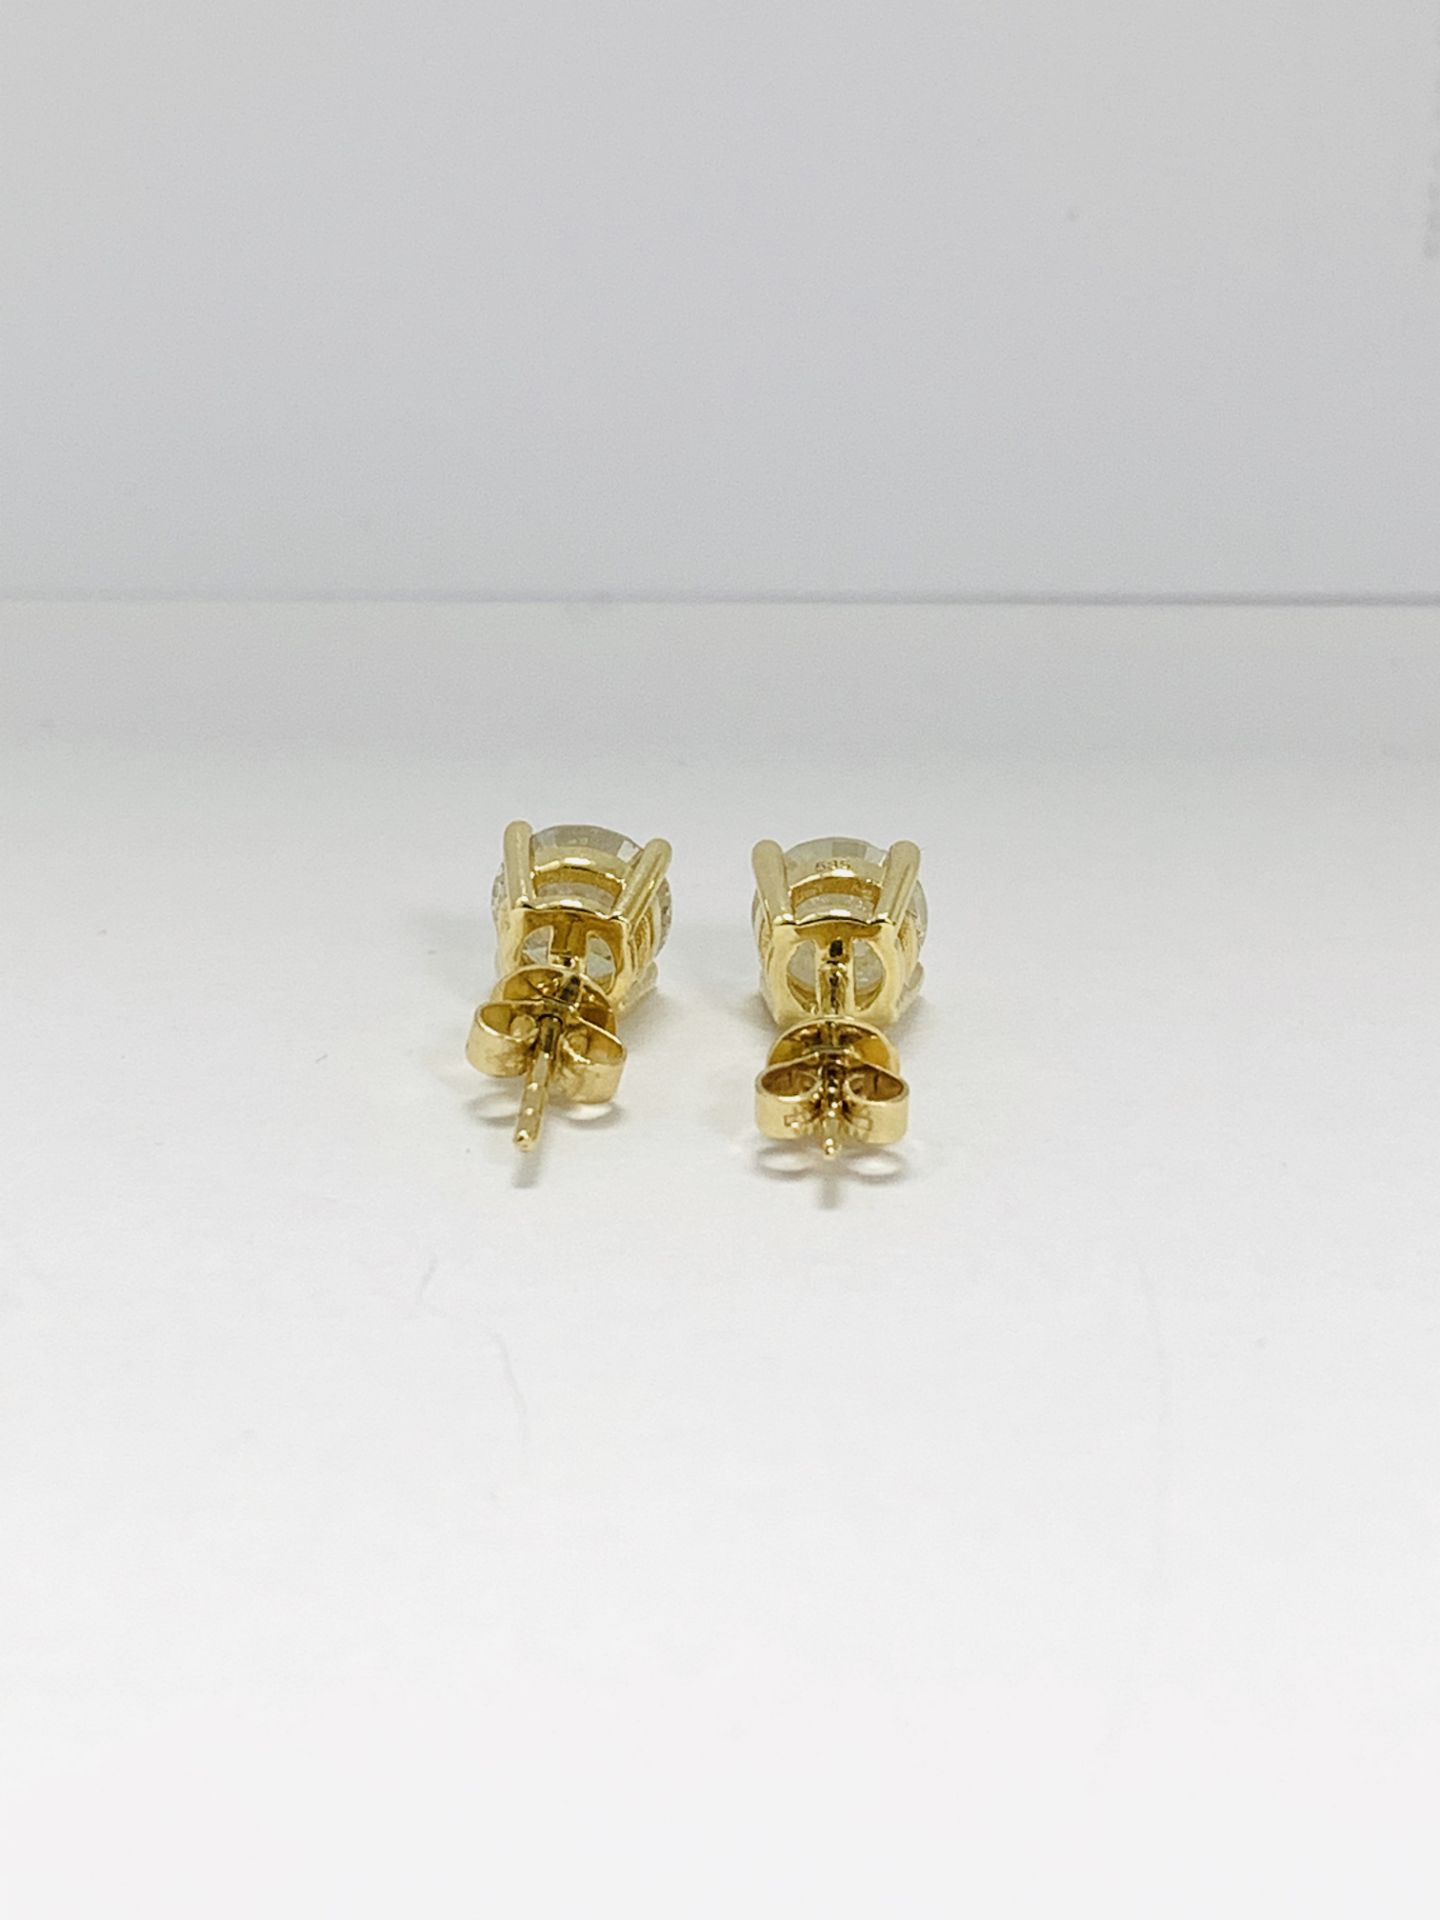 14Ct Yellow Gold Pair Of Earrings - Image 4 of 9